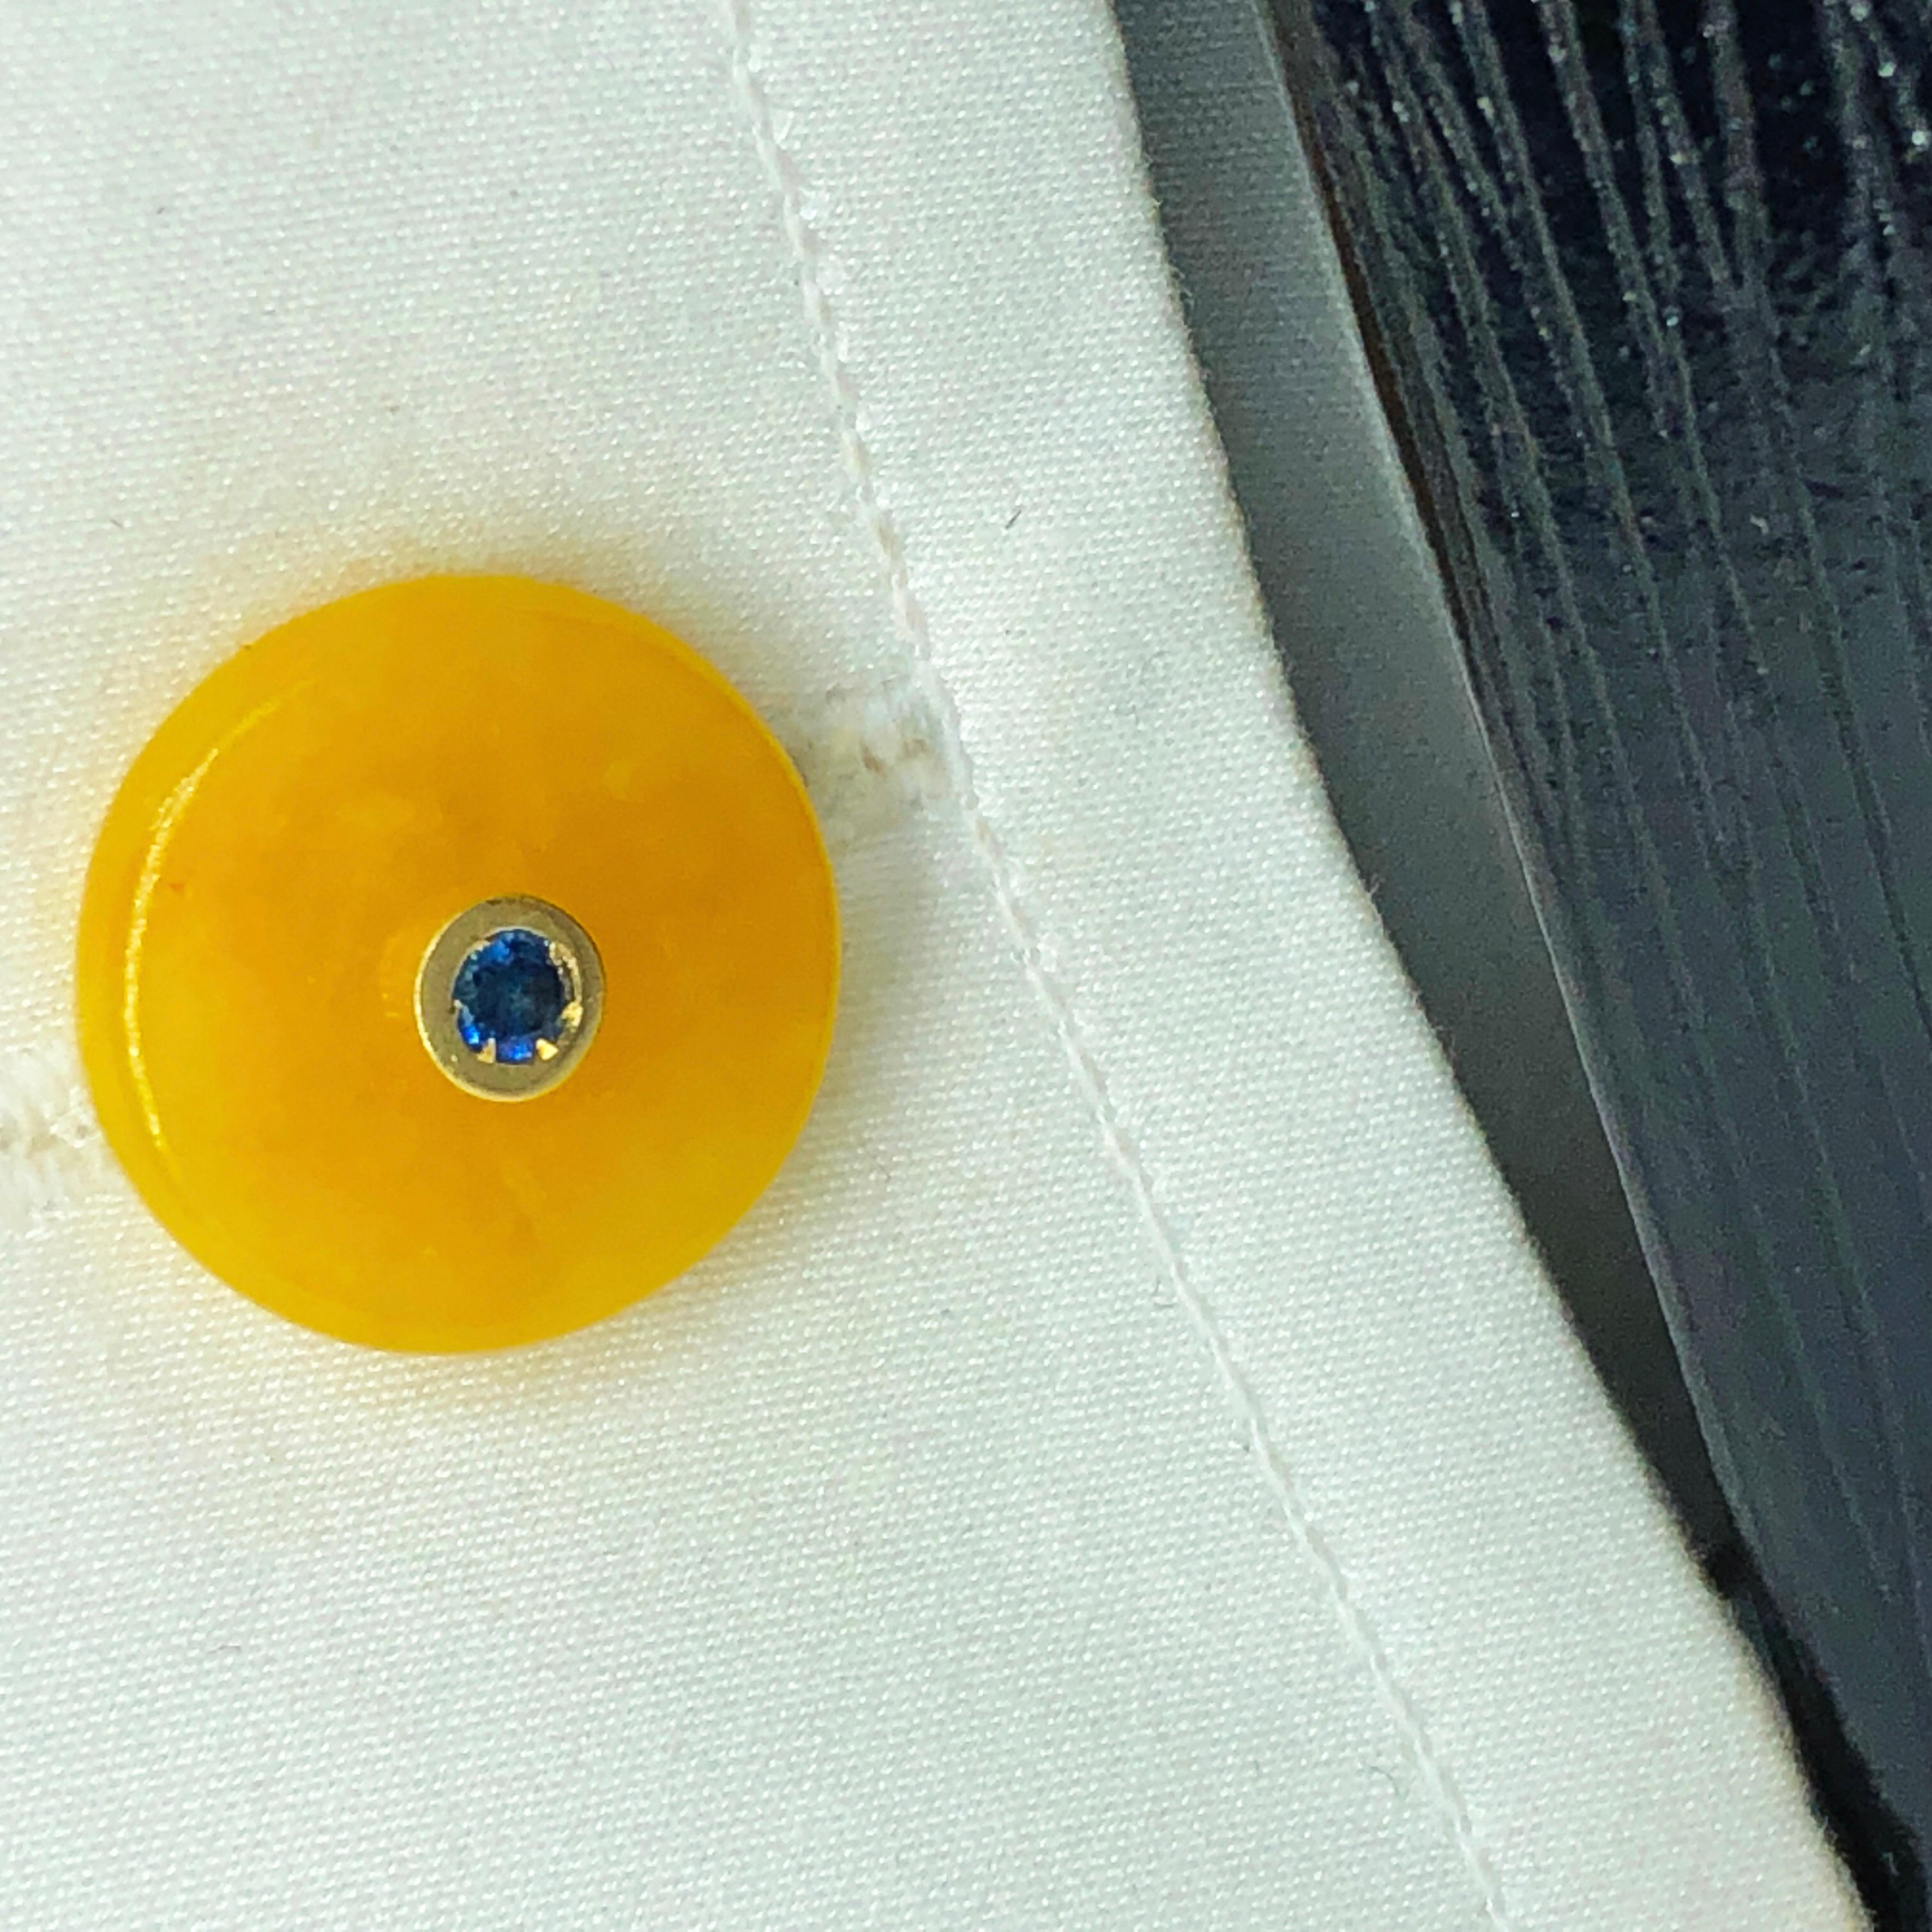 Berca Blue Sapphire in a 19.50 Kt Yellow Jade Disk 18K Gold Setting Cufflinks In New Condition For Sale In Valenza, IT